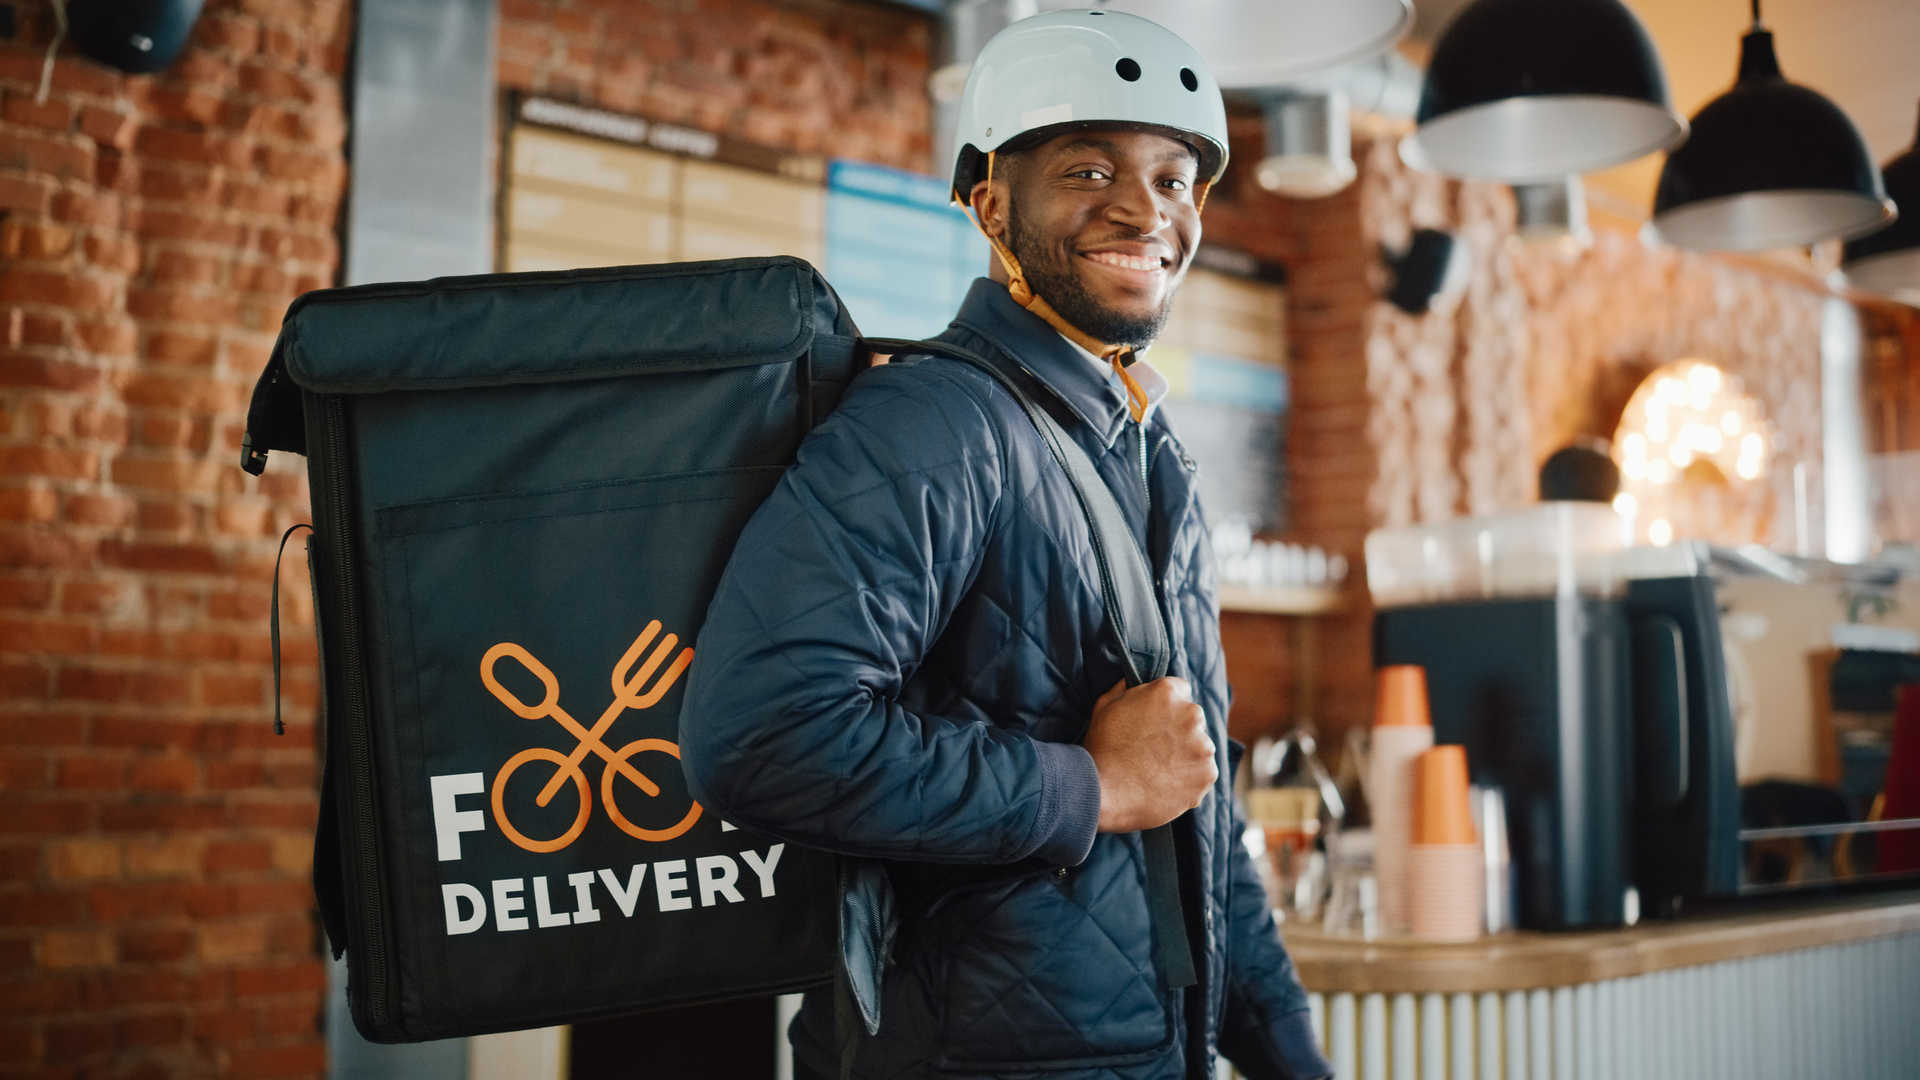 15 Best Food Delivery Services To Work for in 2022